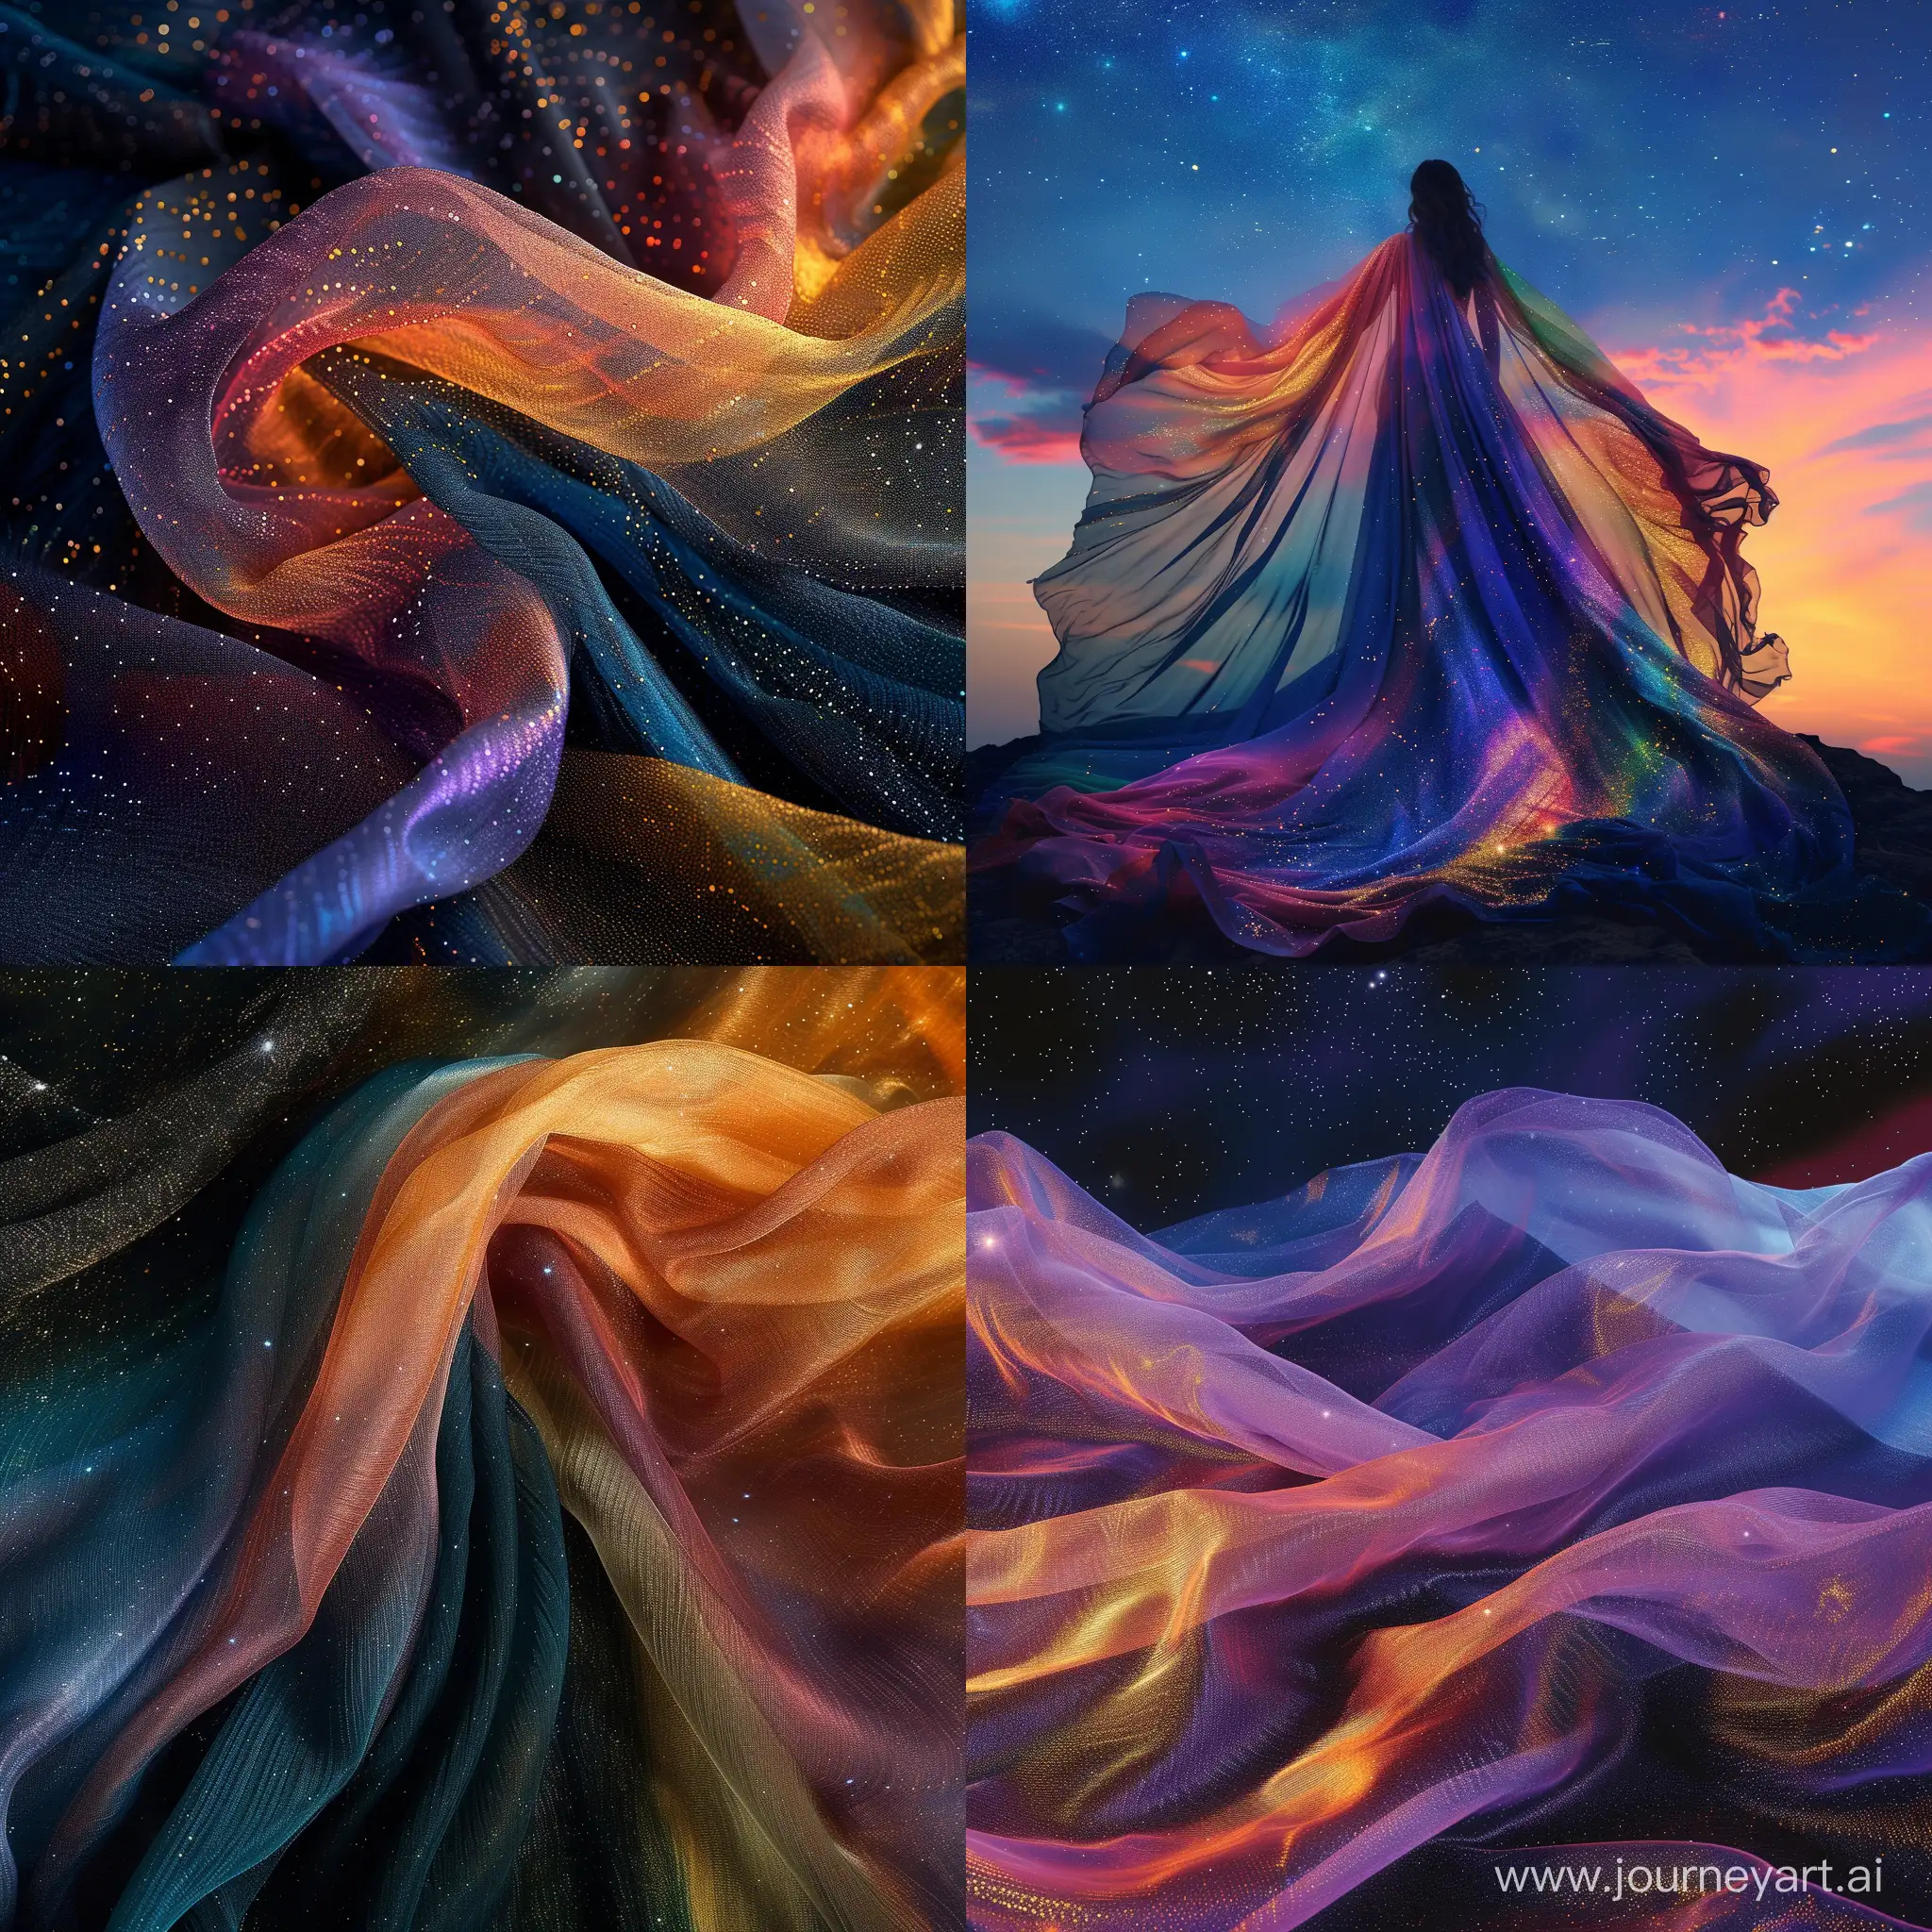 Mixed eclectic beauty in complementary colors Moiré patterns weave, Beauty in high fashion's breath, Otherworldly sheathe, starry sky at earthrise --v 6.0